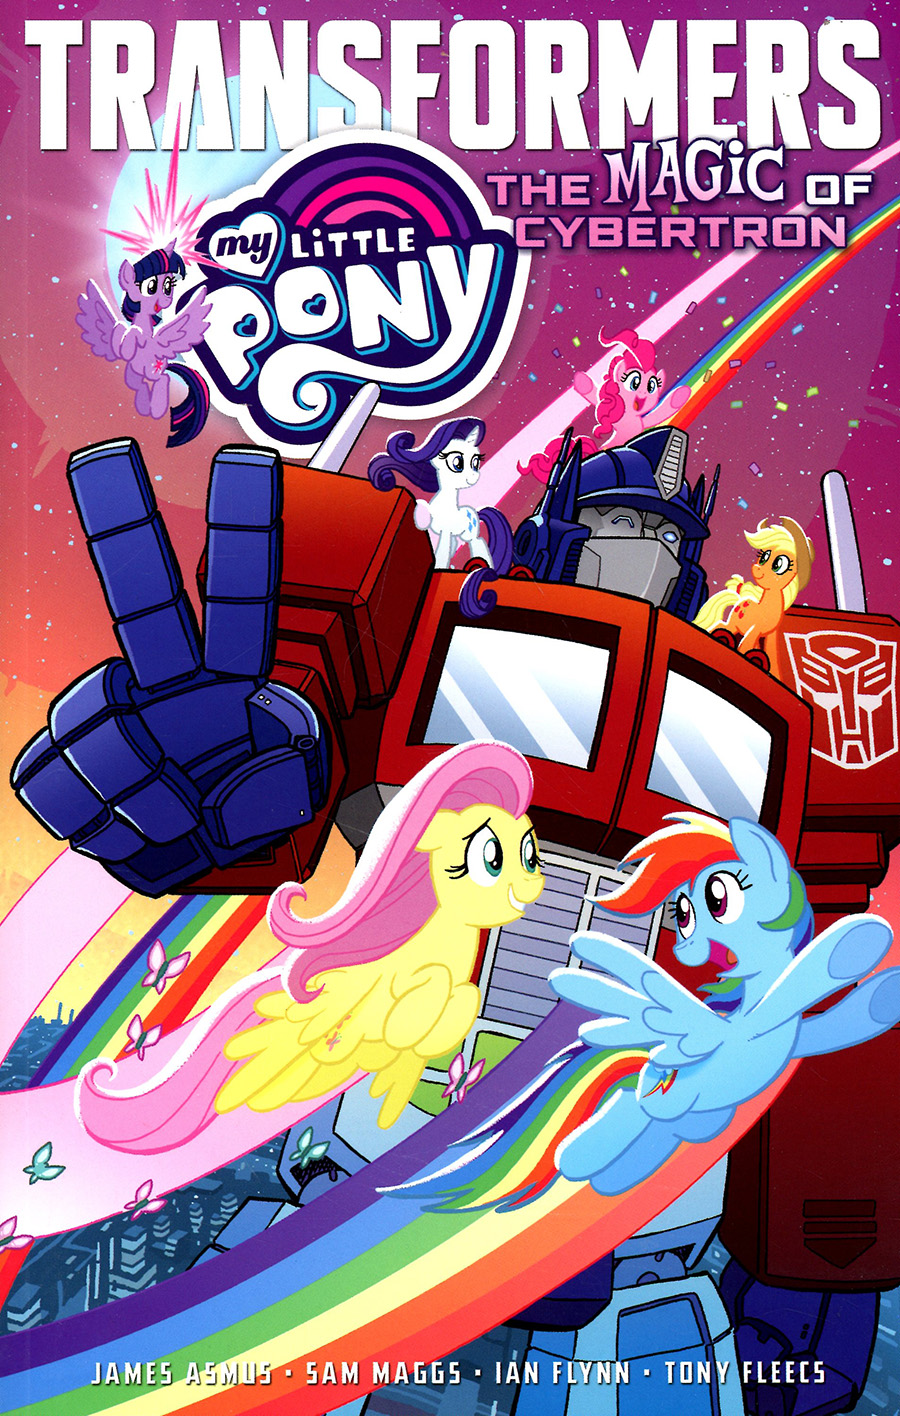 My Little Pony Transformers Magic Of Cybertron TP